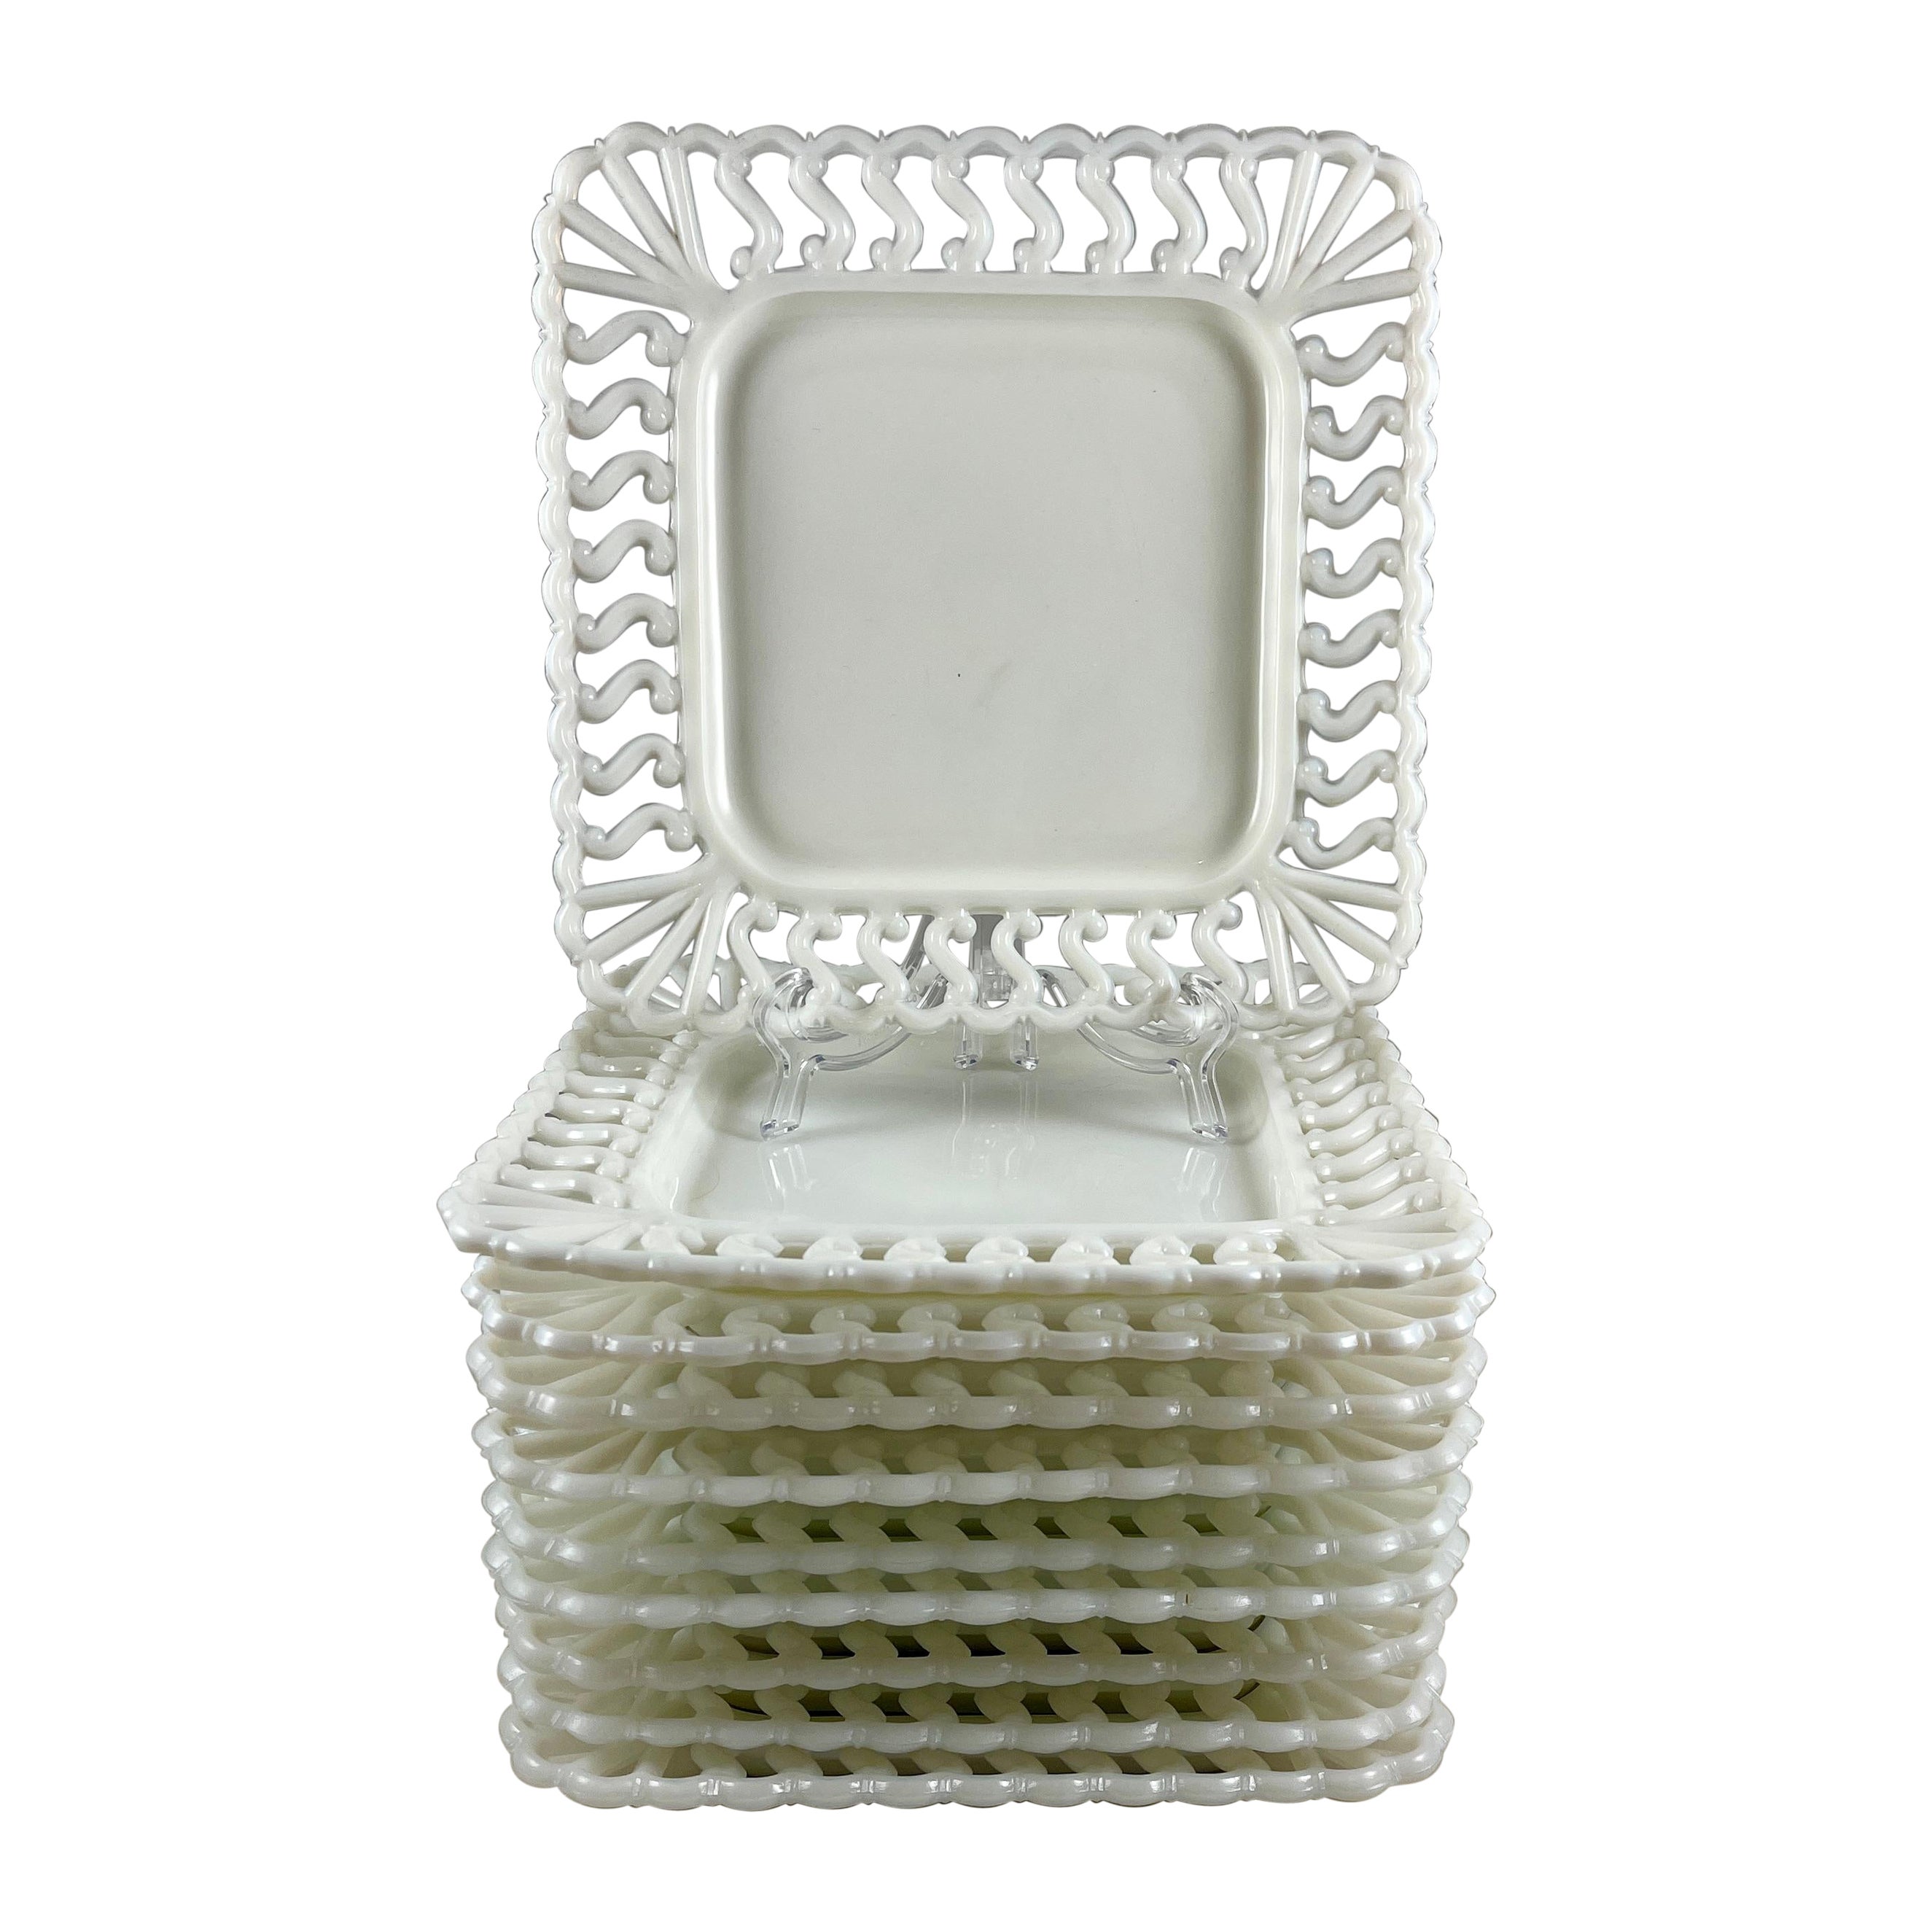 Early American Pattern Glass Opaque White Lace Edge Milk Square Plate, 1880-1890